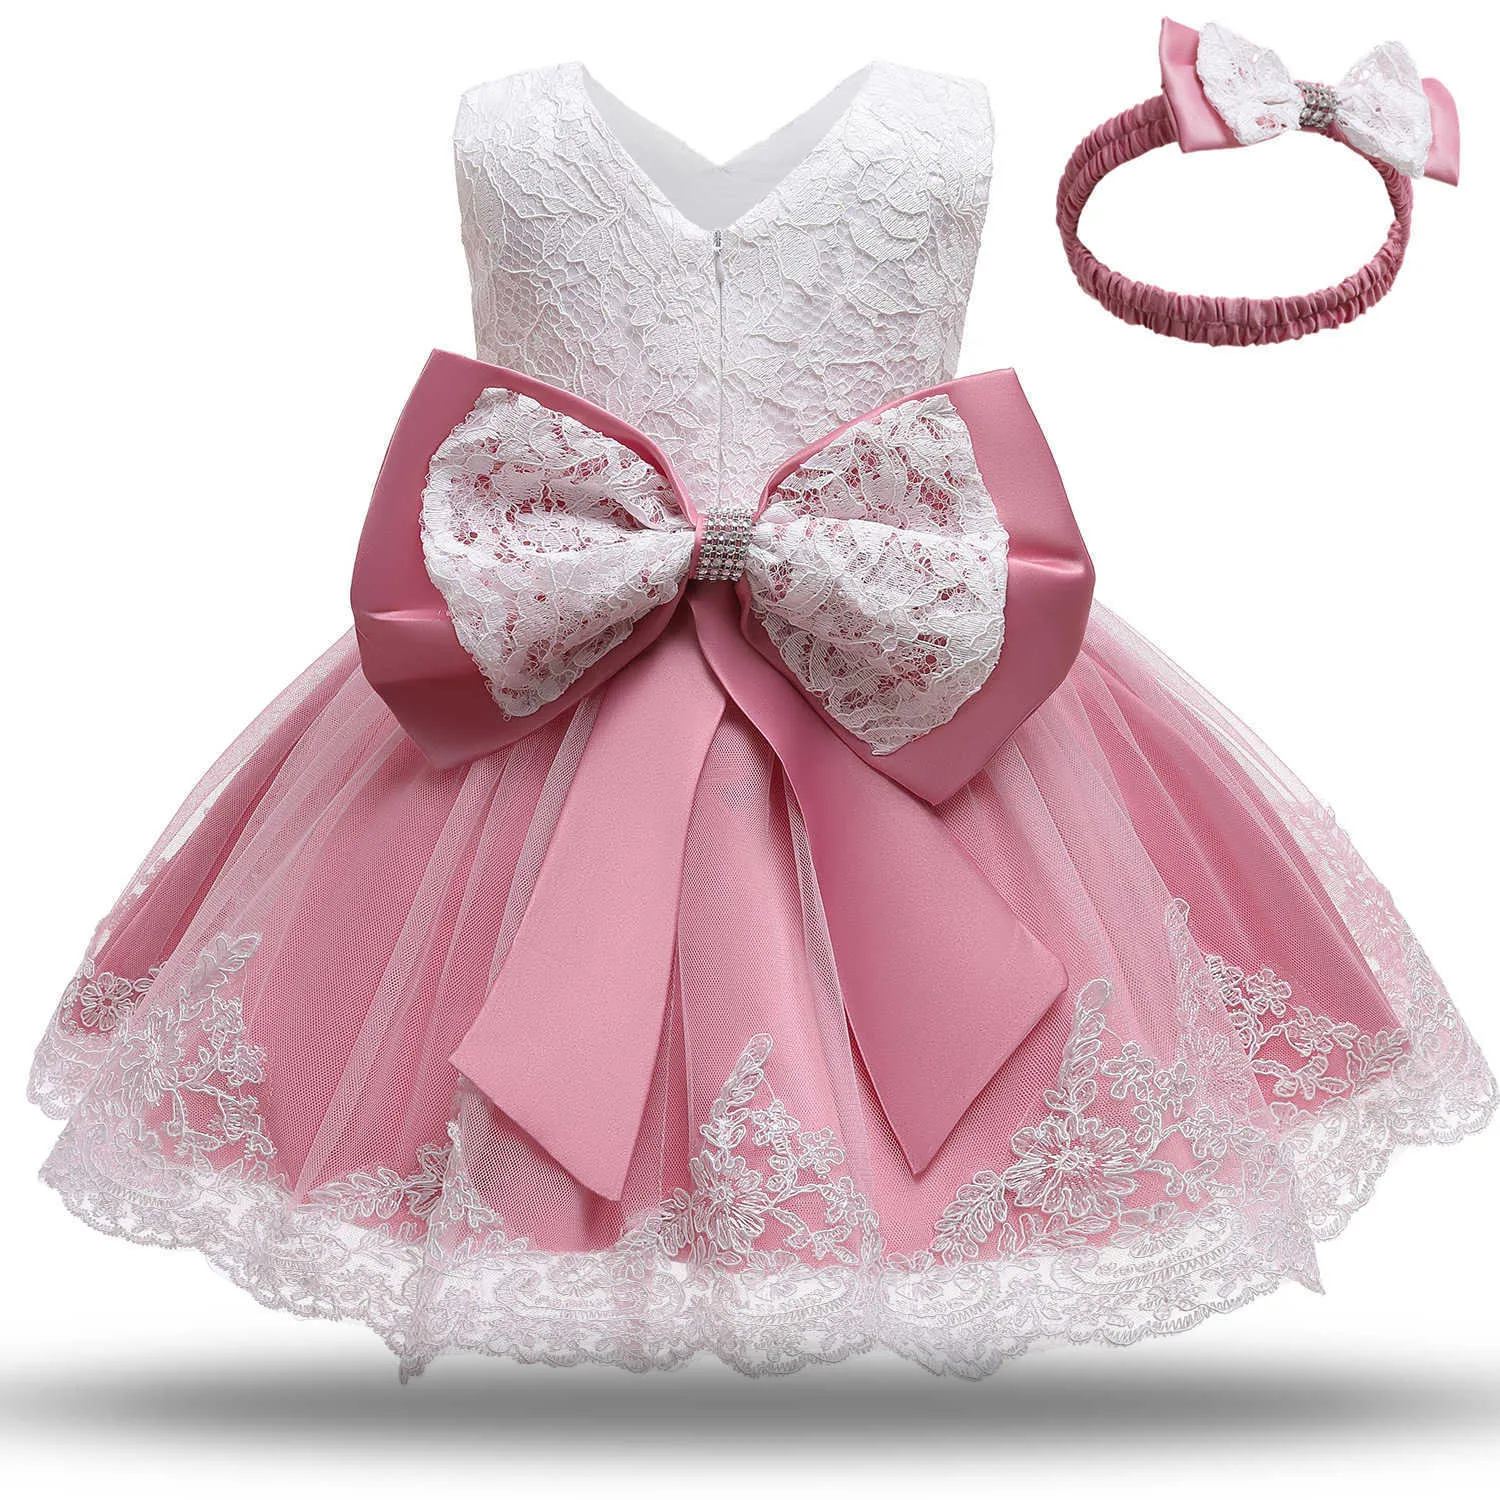 Best selling baby princess dress one year old dress BOW LACE DRESS Baby Dresses